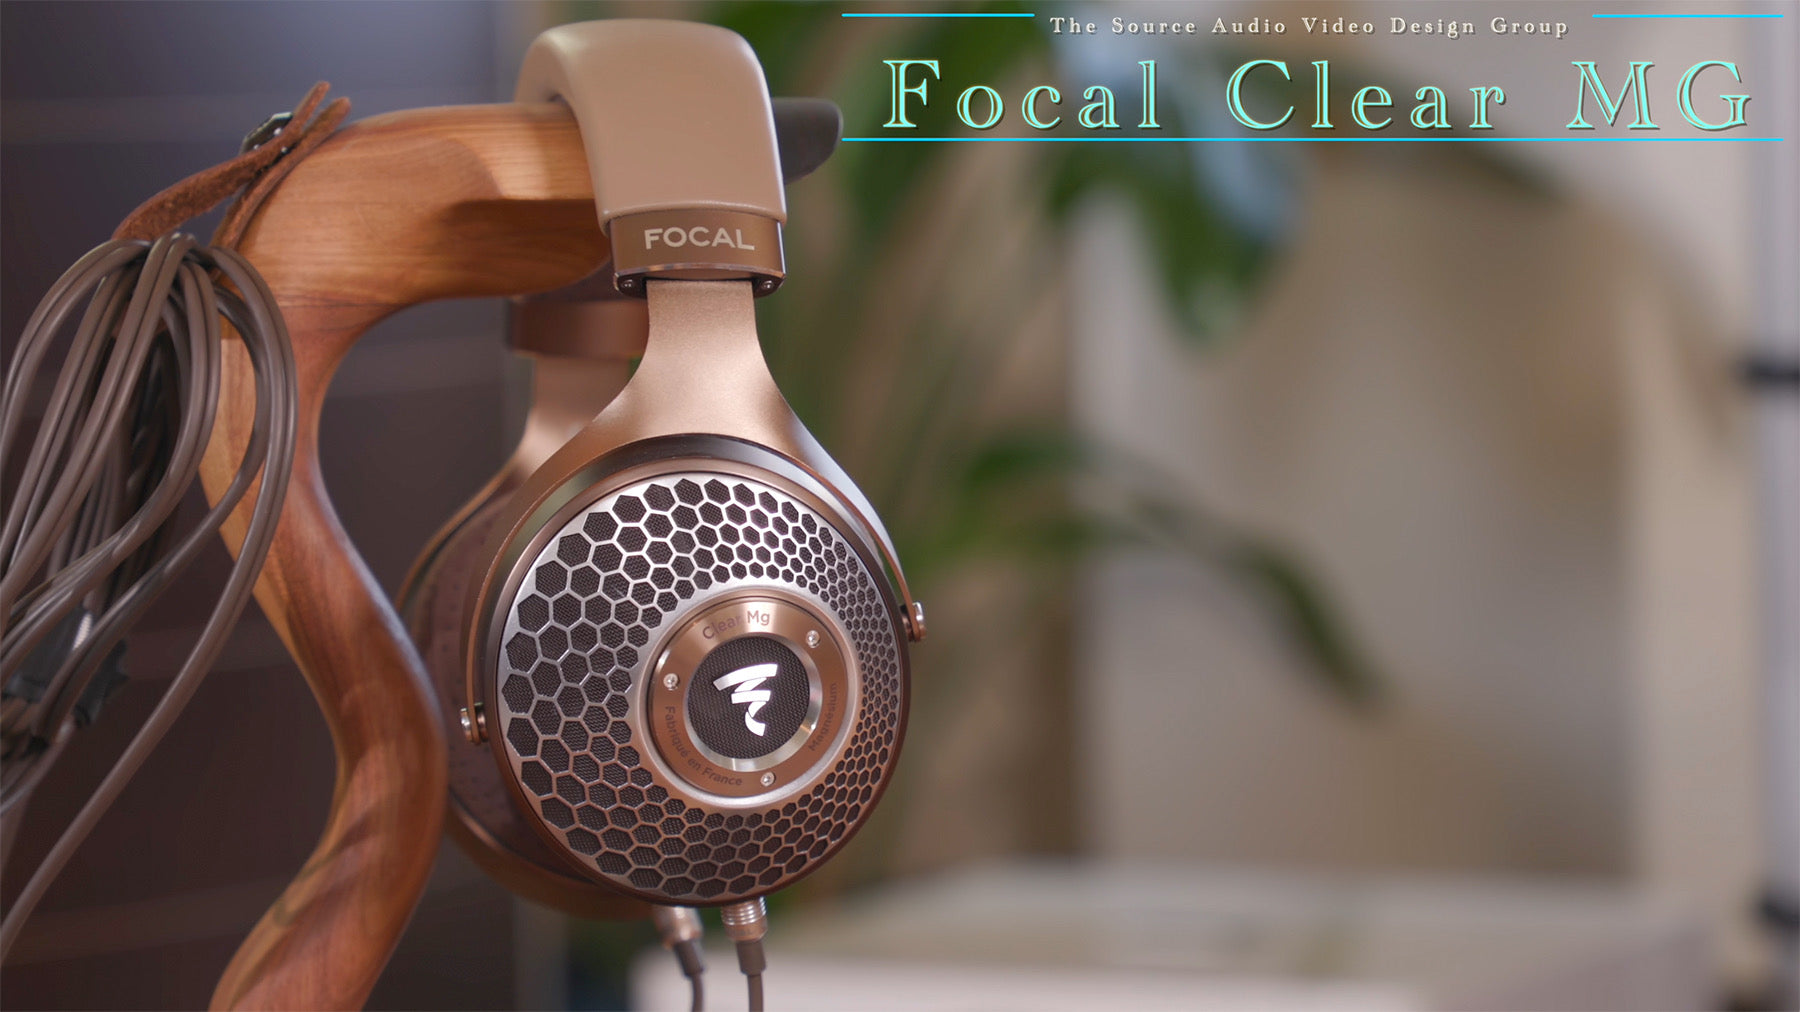 Focal Clear MG Headphones Presented by TSAV with HD800s and HEDD Audio HEDDphone impressions